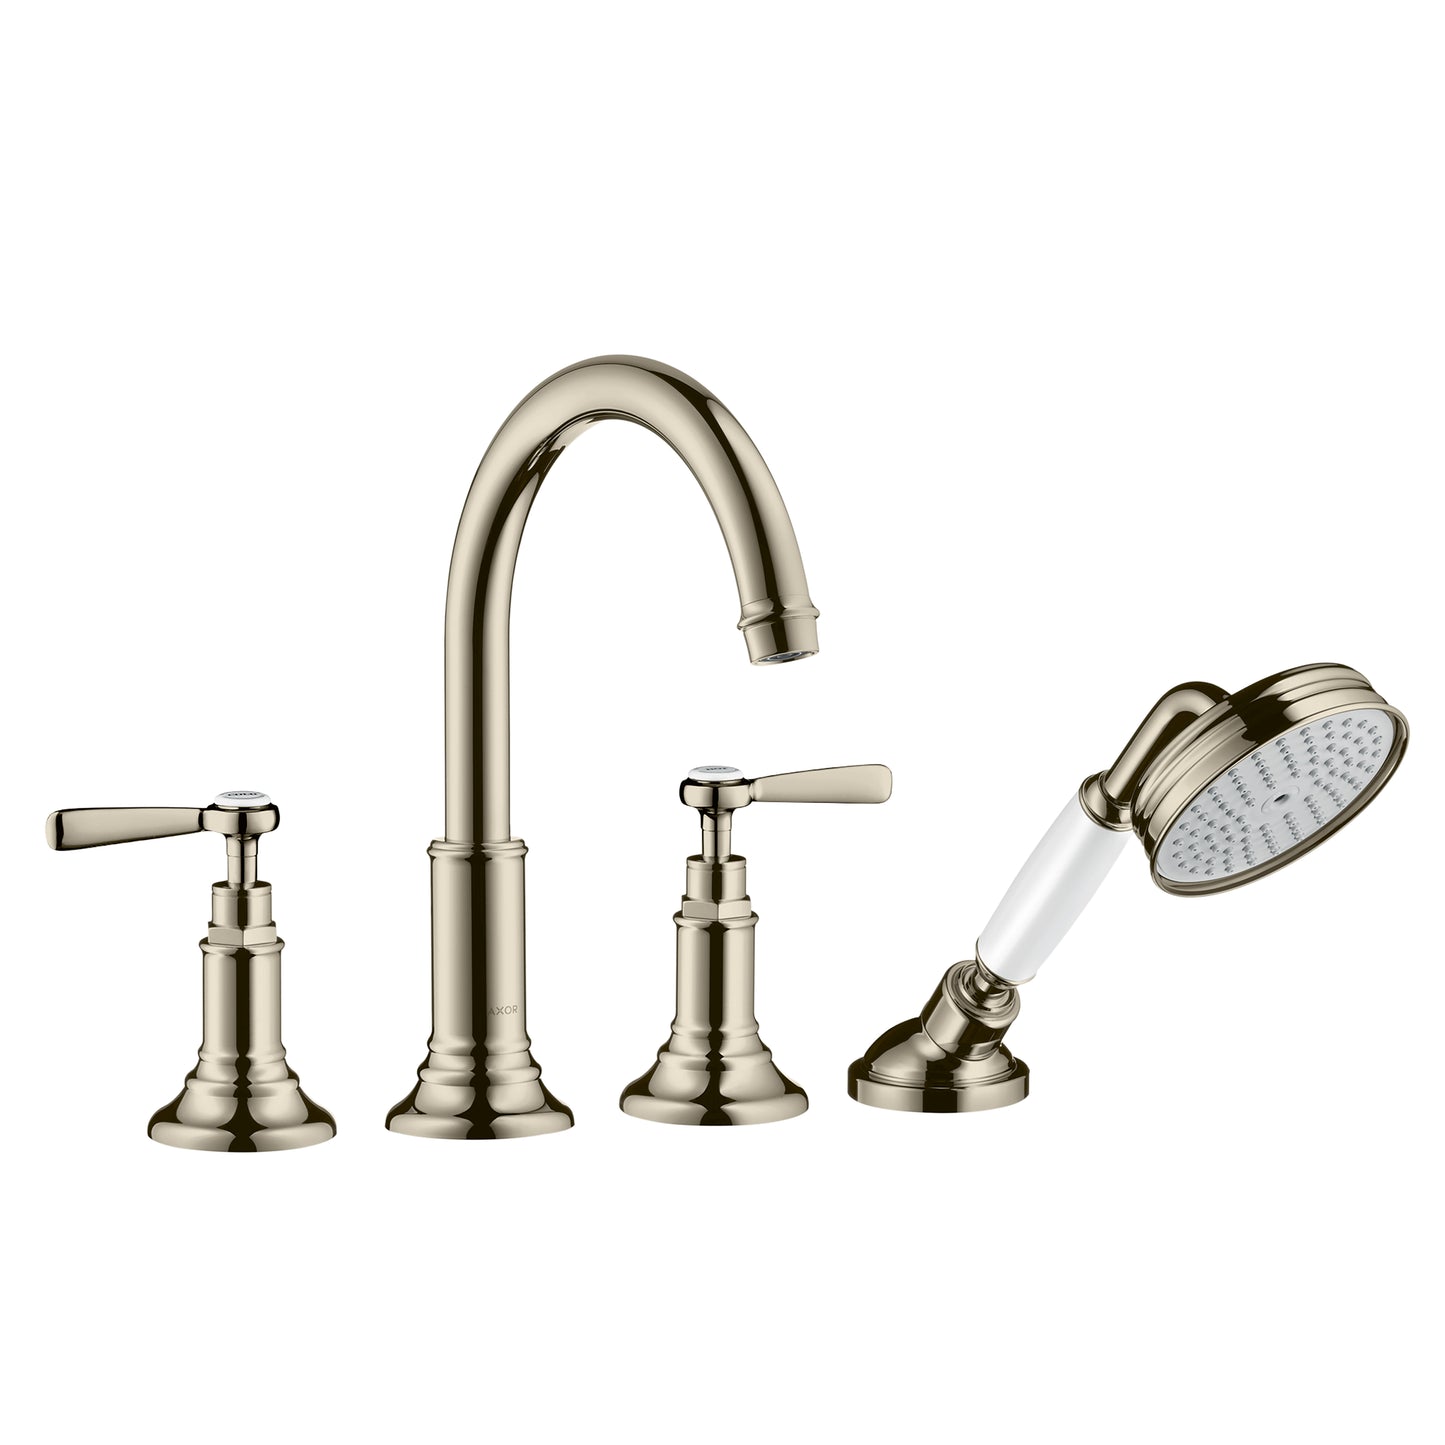 AXOR 16555831 Polished Nickel Montreux Classic Tub Filler 1.8 GPM